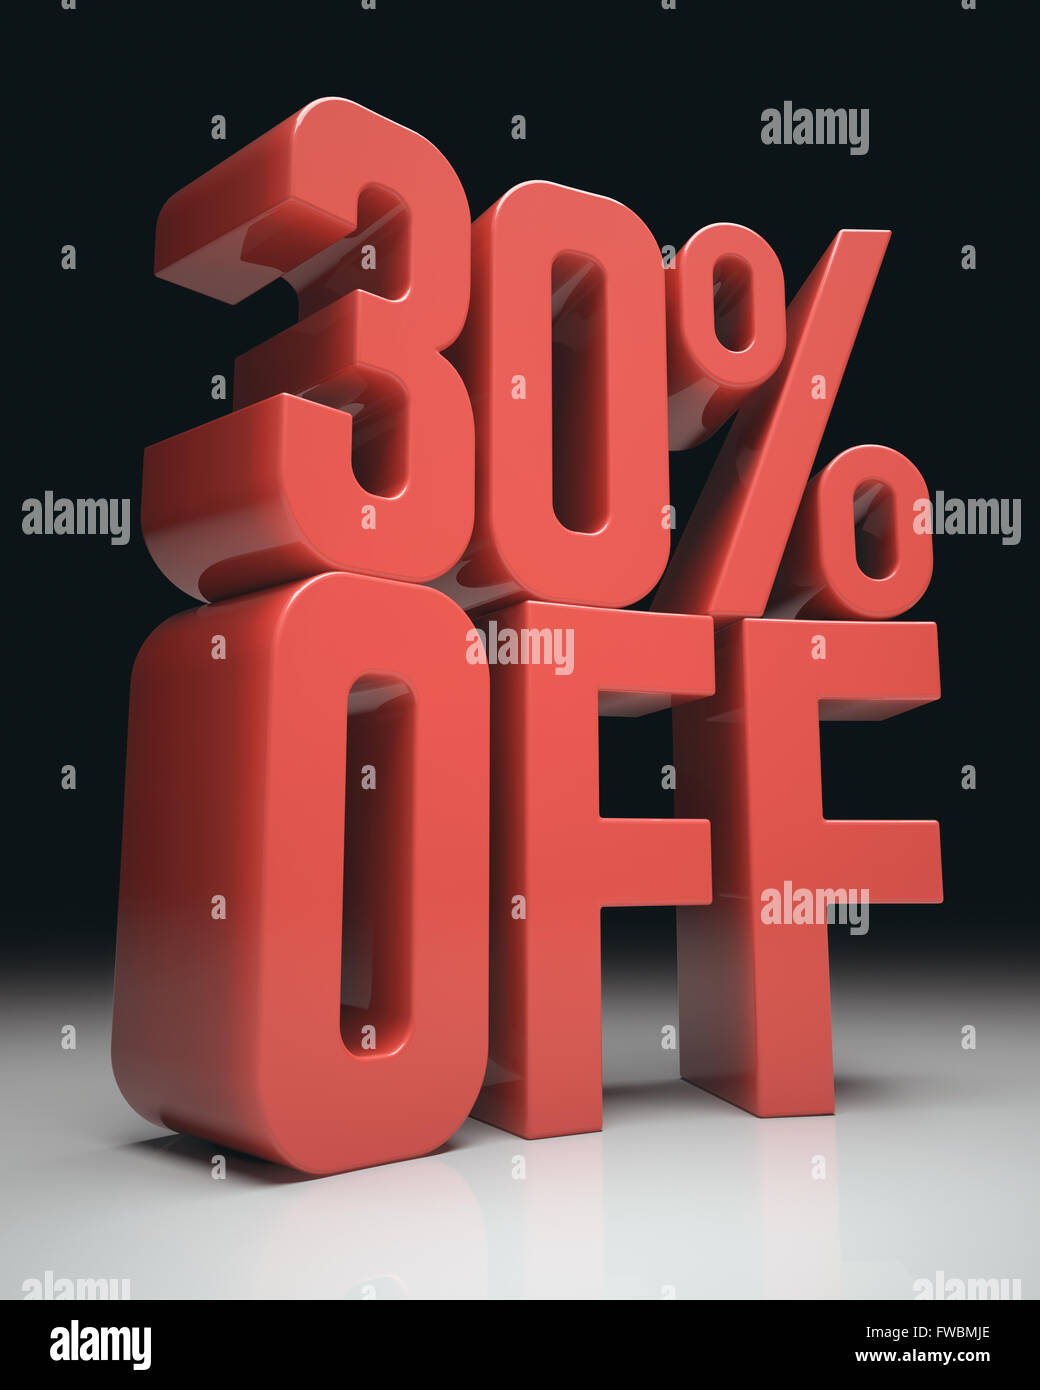 3D image concept. Discount percentage in red on white surface and black background. Clipping path included. Stock Photo